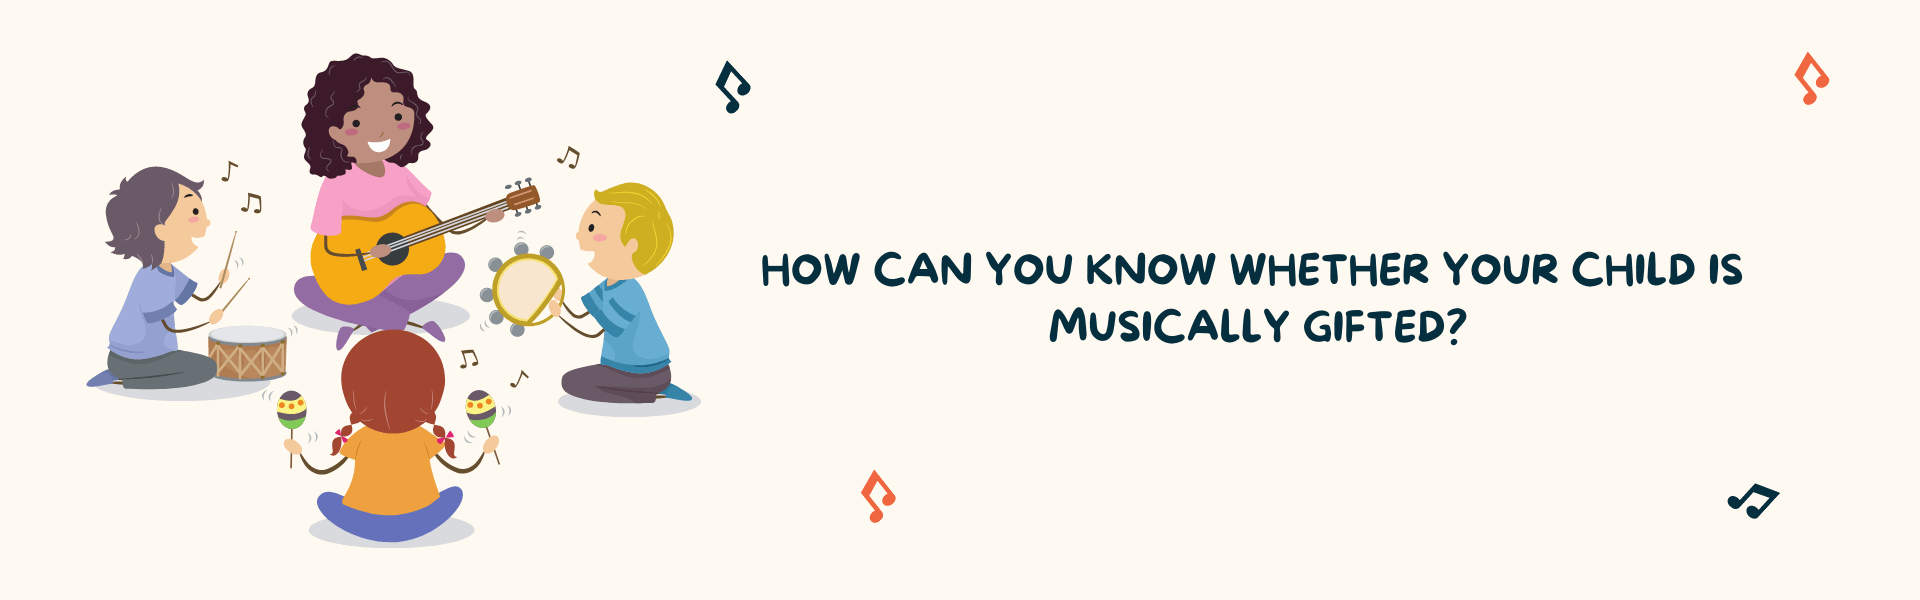 How Can You Know Whether Your Child Is Musically Gifted?